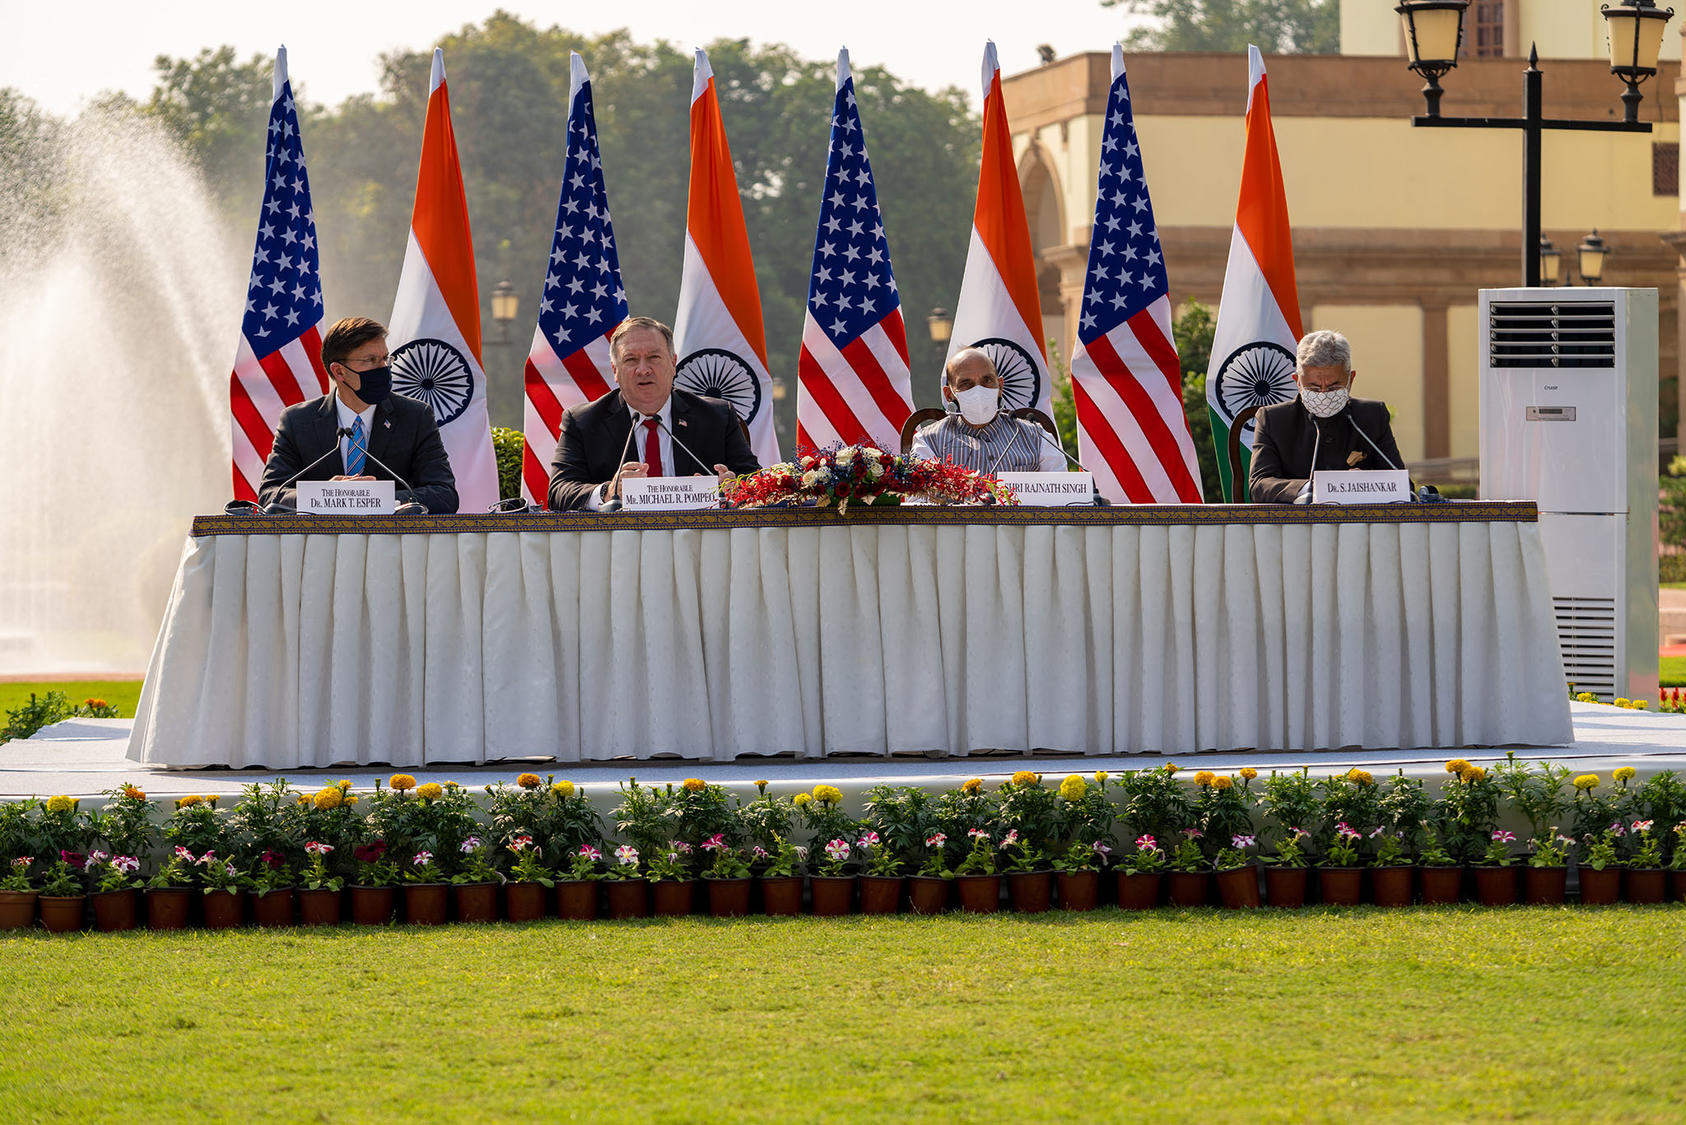 Secretary Pompeo and former Defense Secretary Mark Esper at the joint U.S.-India 2+2 Ministerial Dialogue with India’s external affairs and defense ministers, in New Delhi, India, on October 27, 2020. (Ron Przysucha/U.S. State Department)